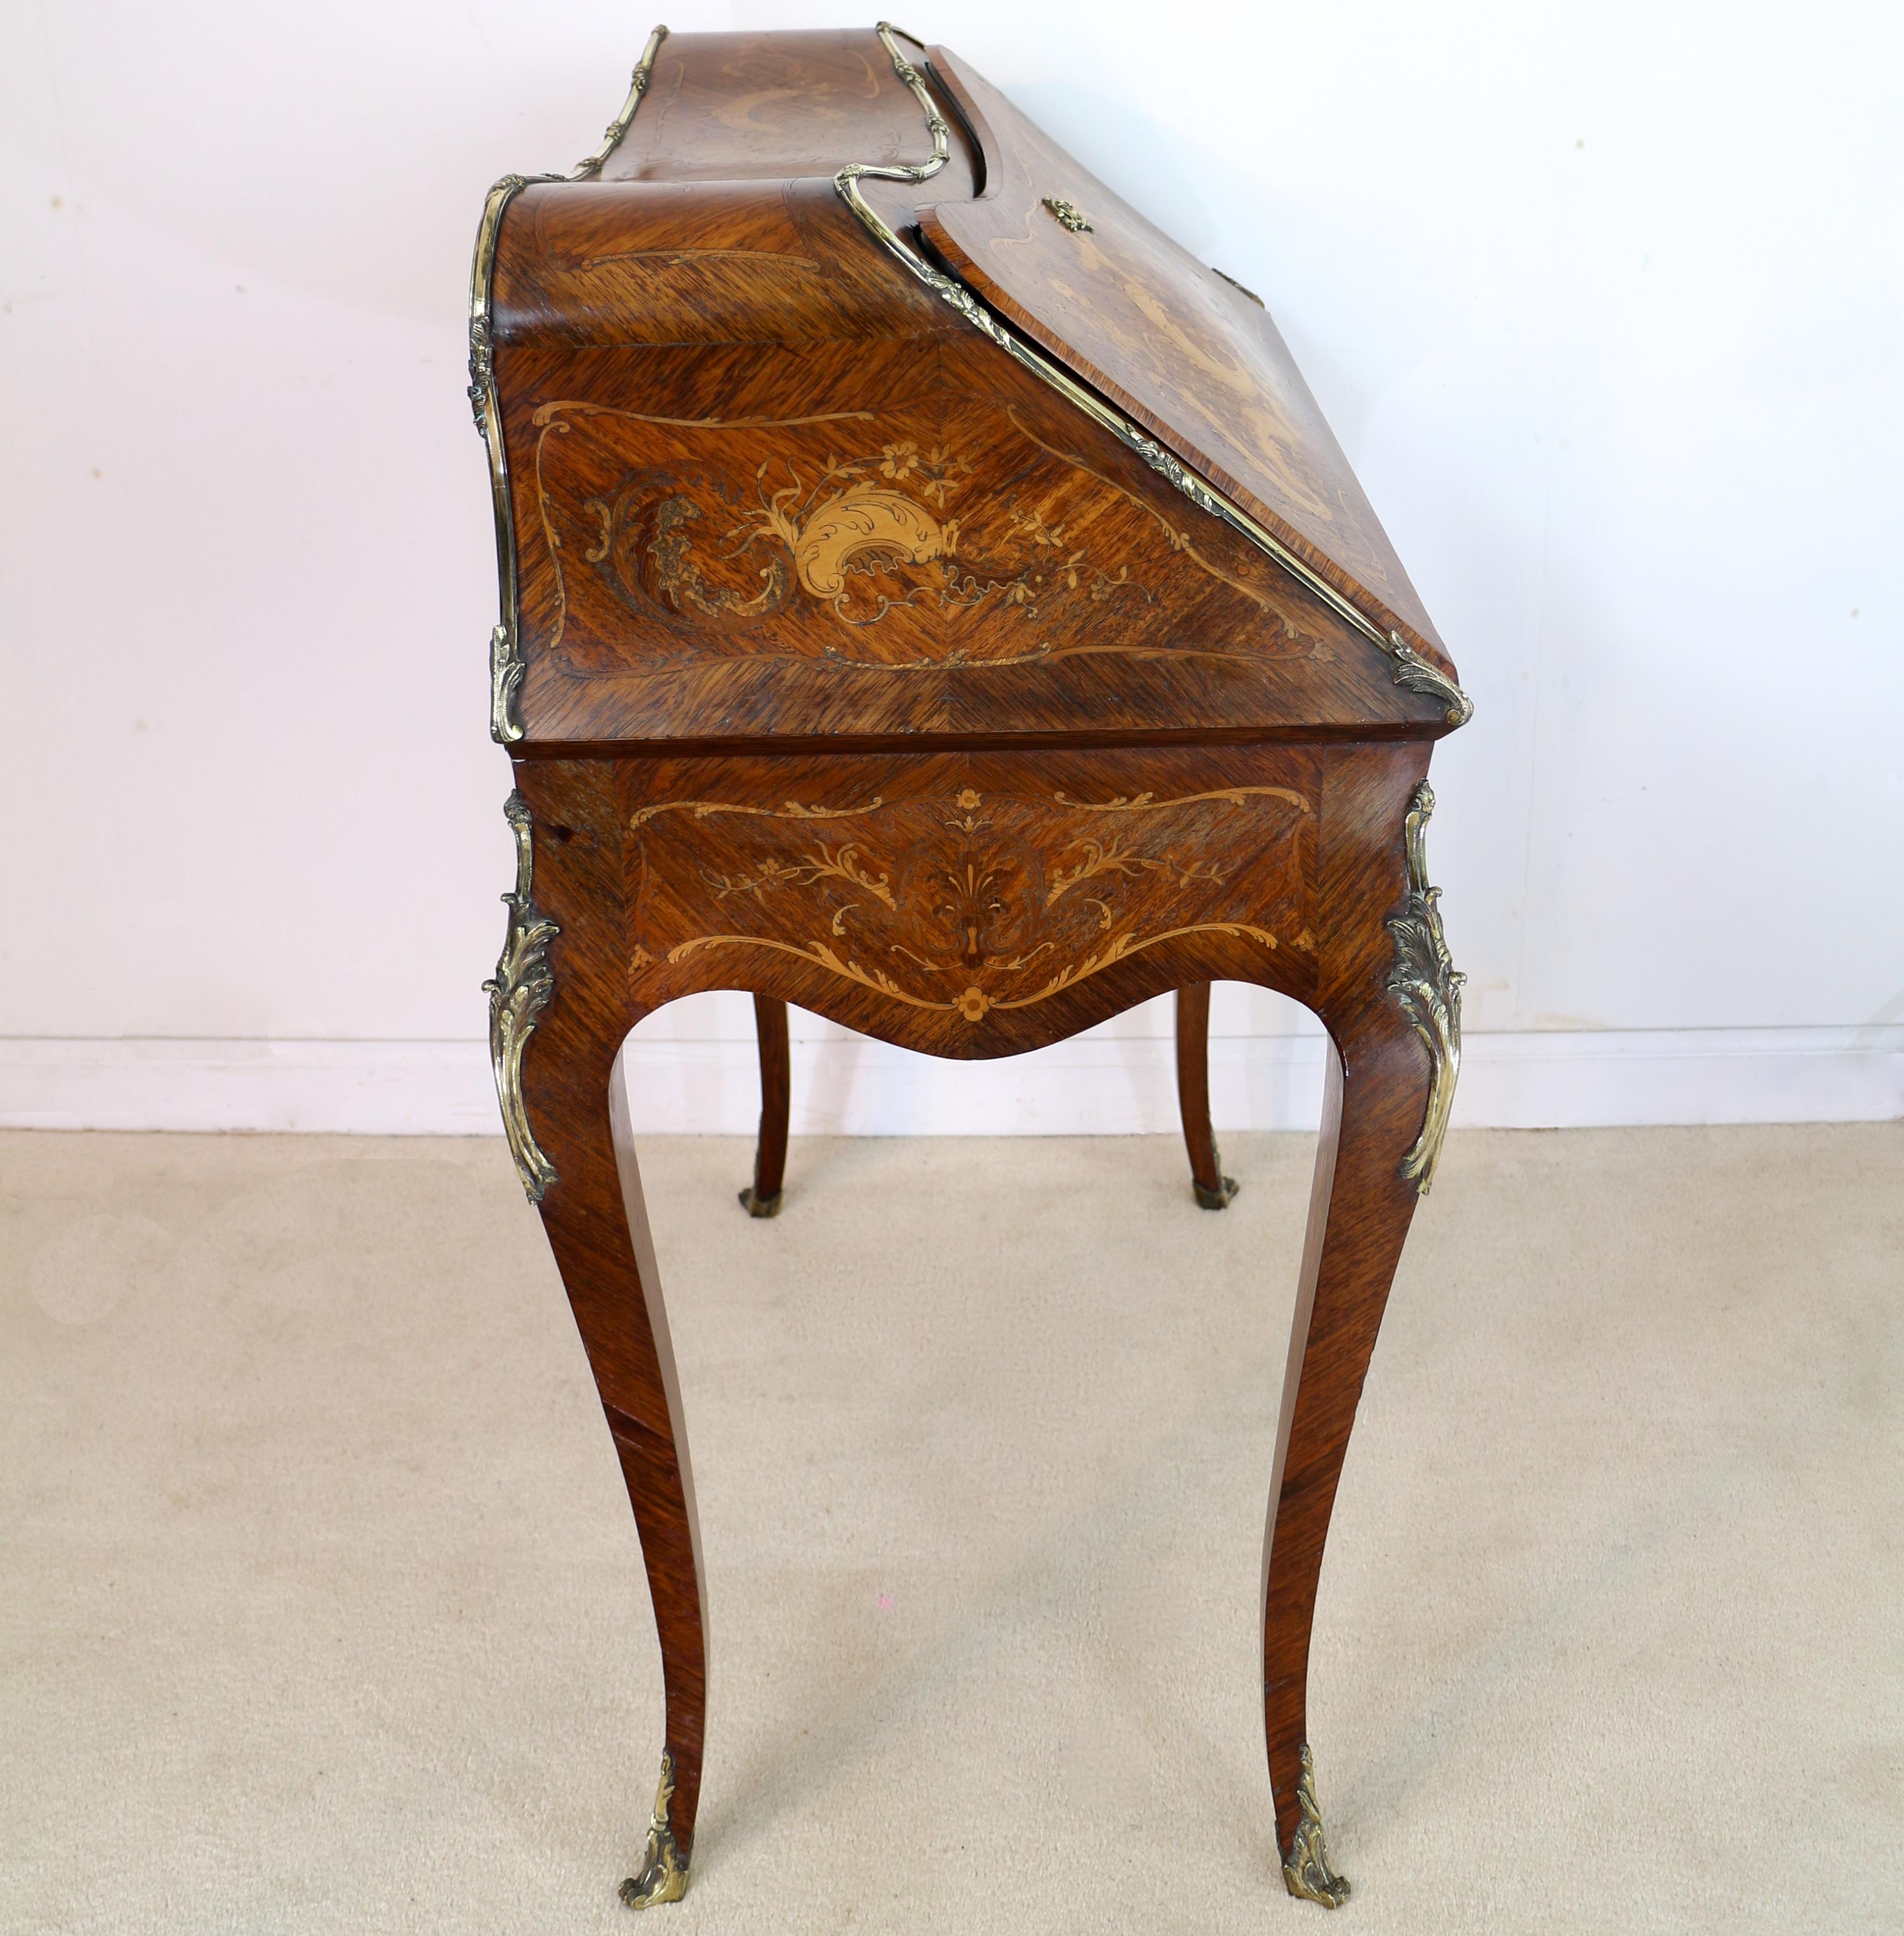 Antique French Louis XV Style Kingwood and Marquetry Bureau de Dame For Sale 4